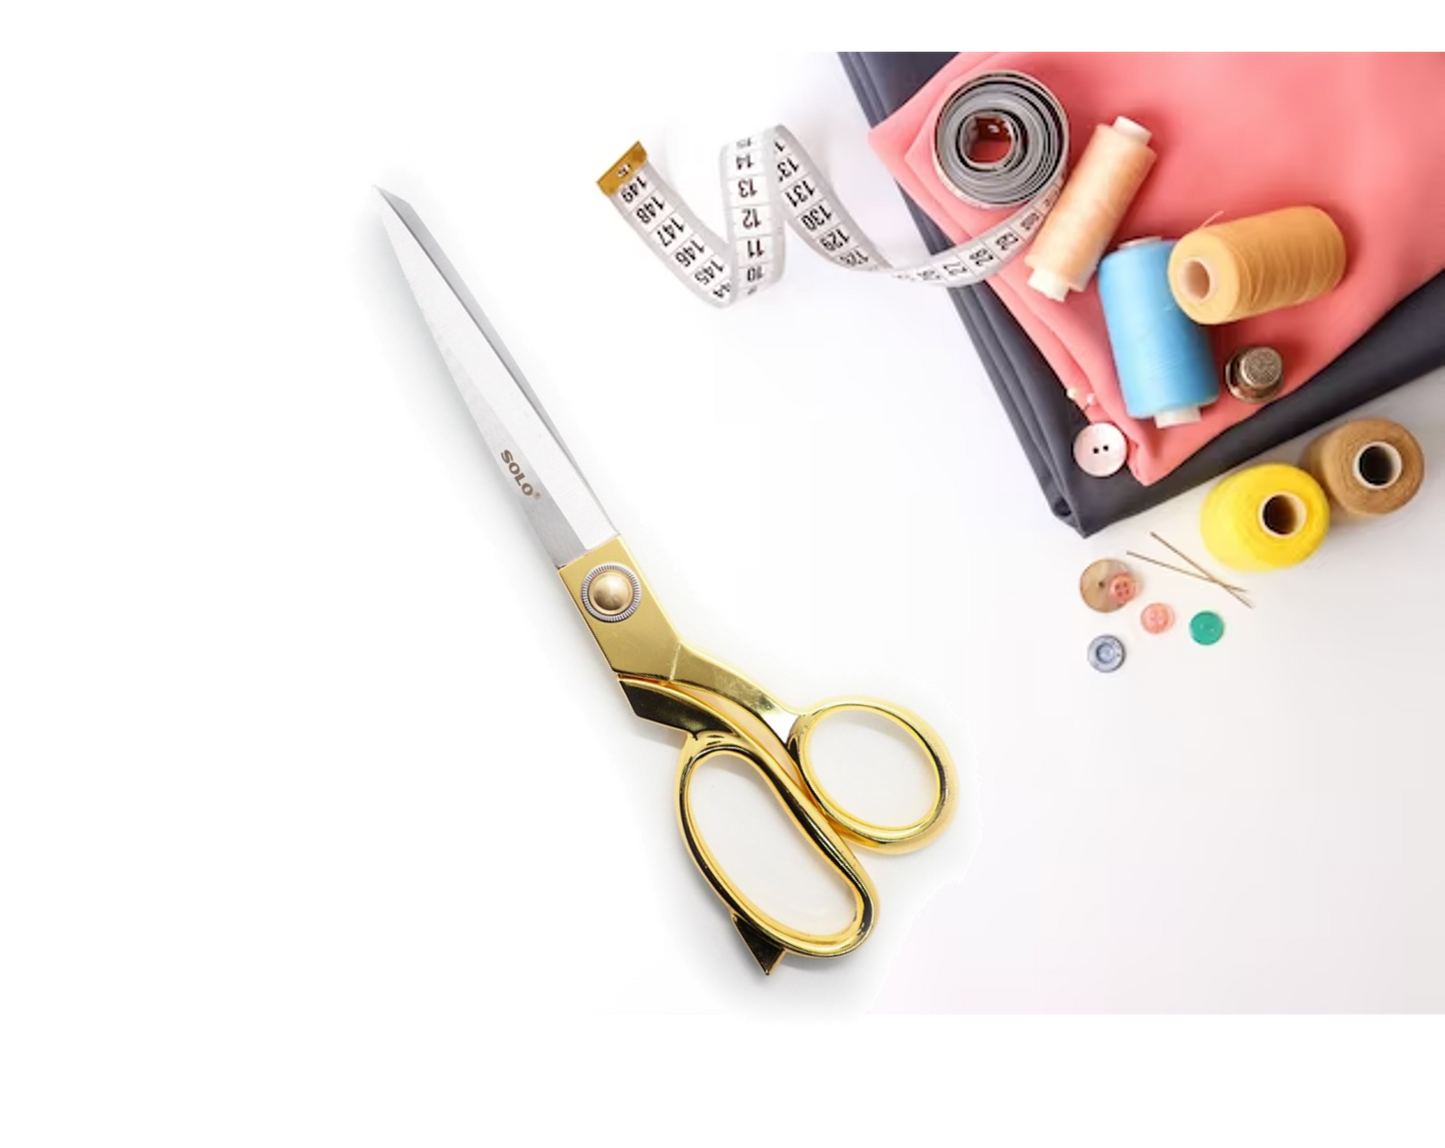 SOLO Scissors Tailor Fabric 10” Sewing Fabric Shears Heavy Duty Stainless Steel Dressmaker Cutting Premium Leather Professional Trimming